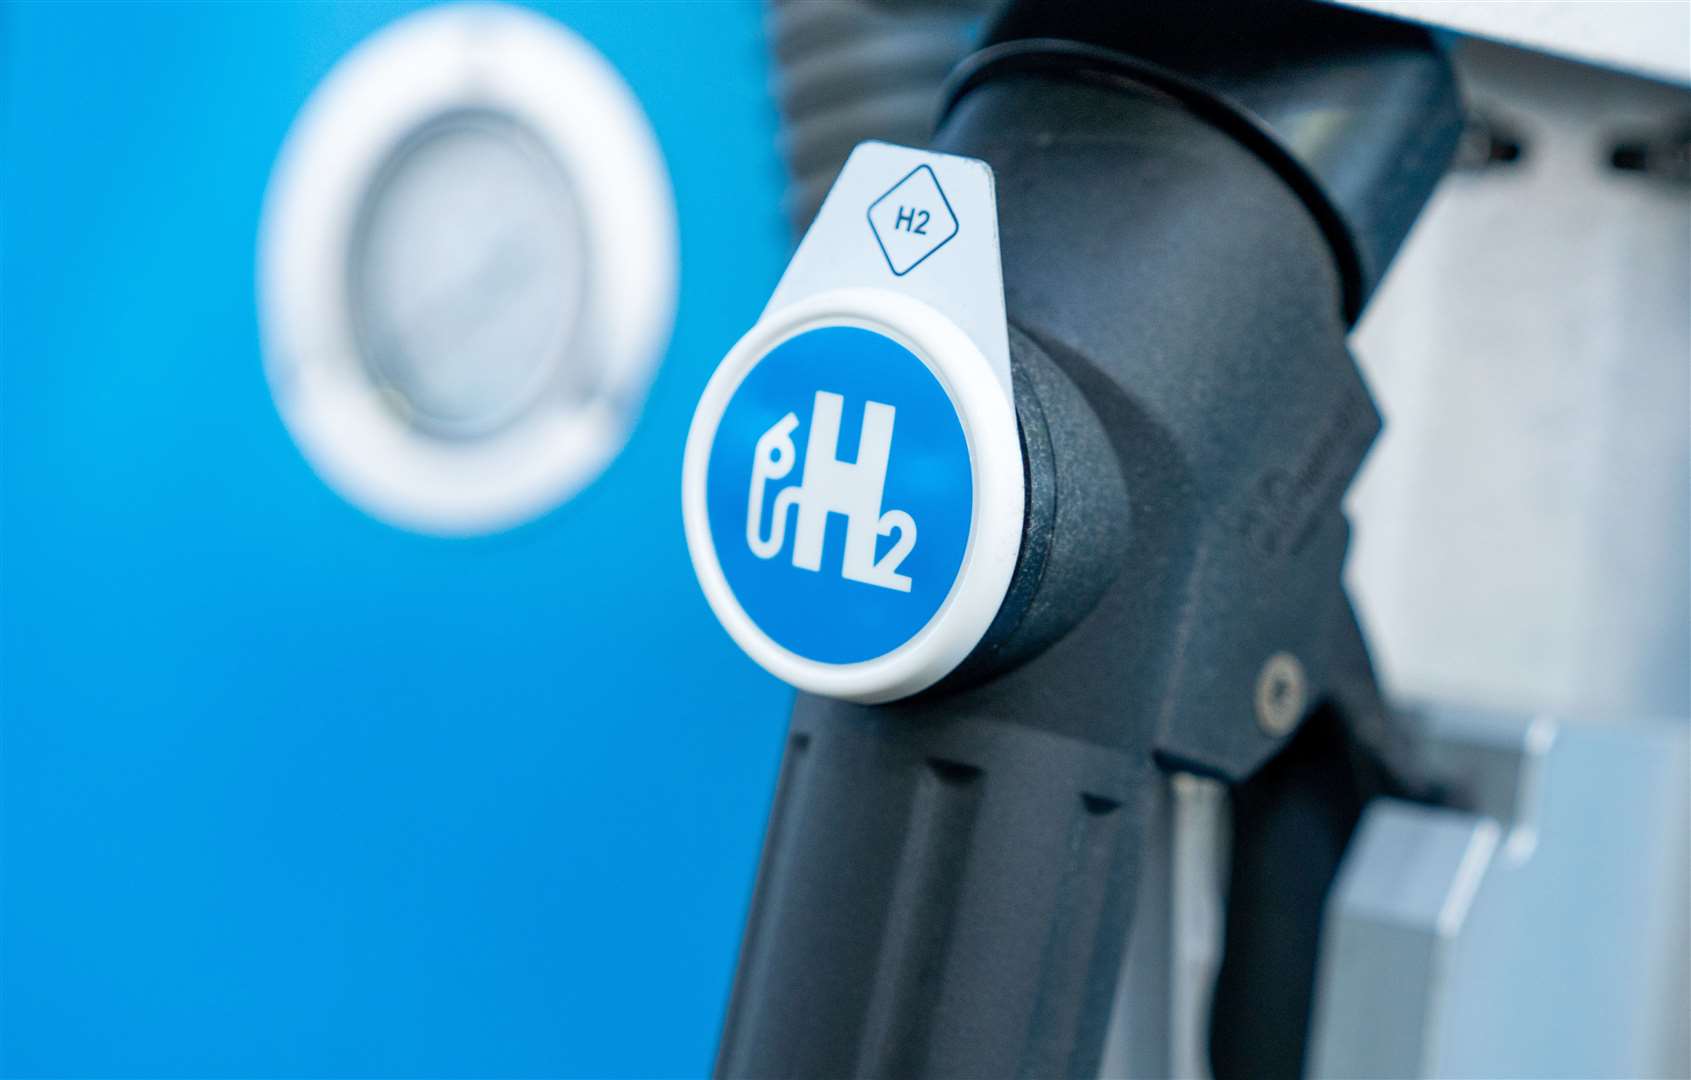 The new system should make it easier for public bodies to invest in hydrogen fuel infrastructure.